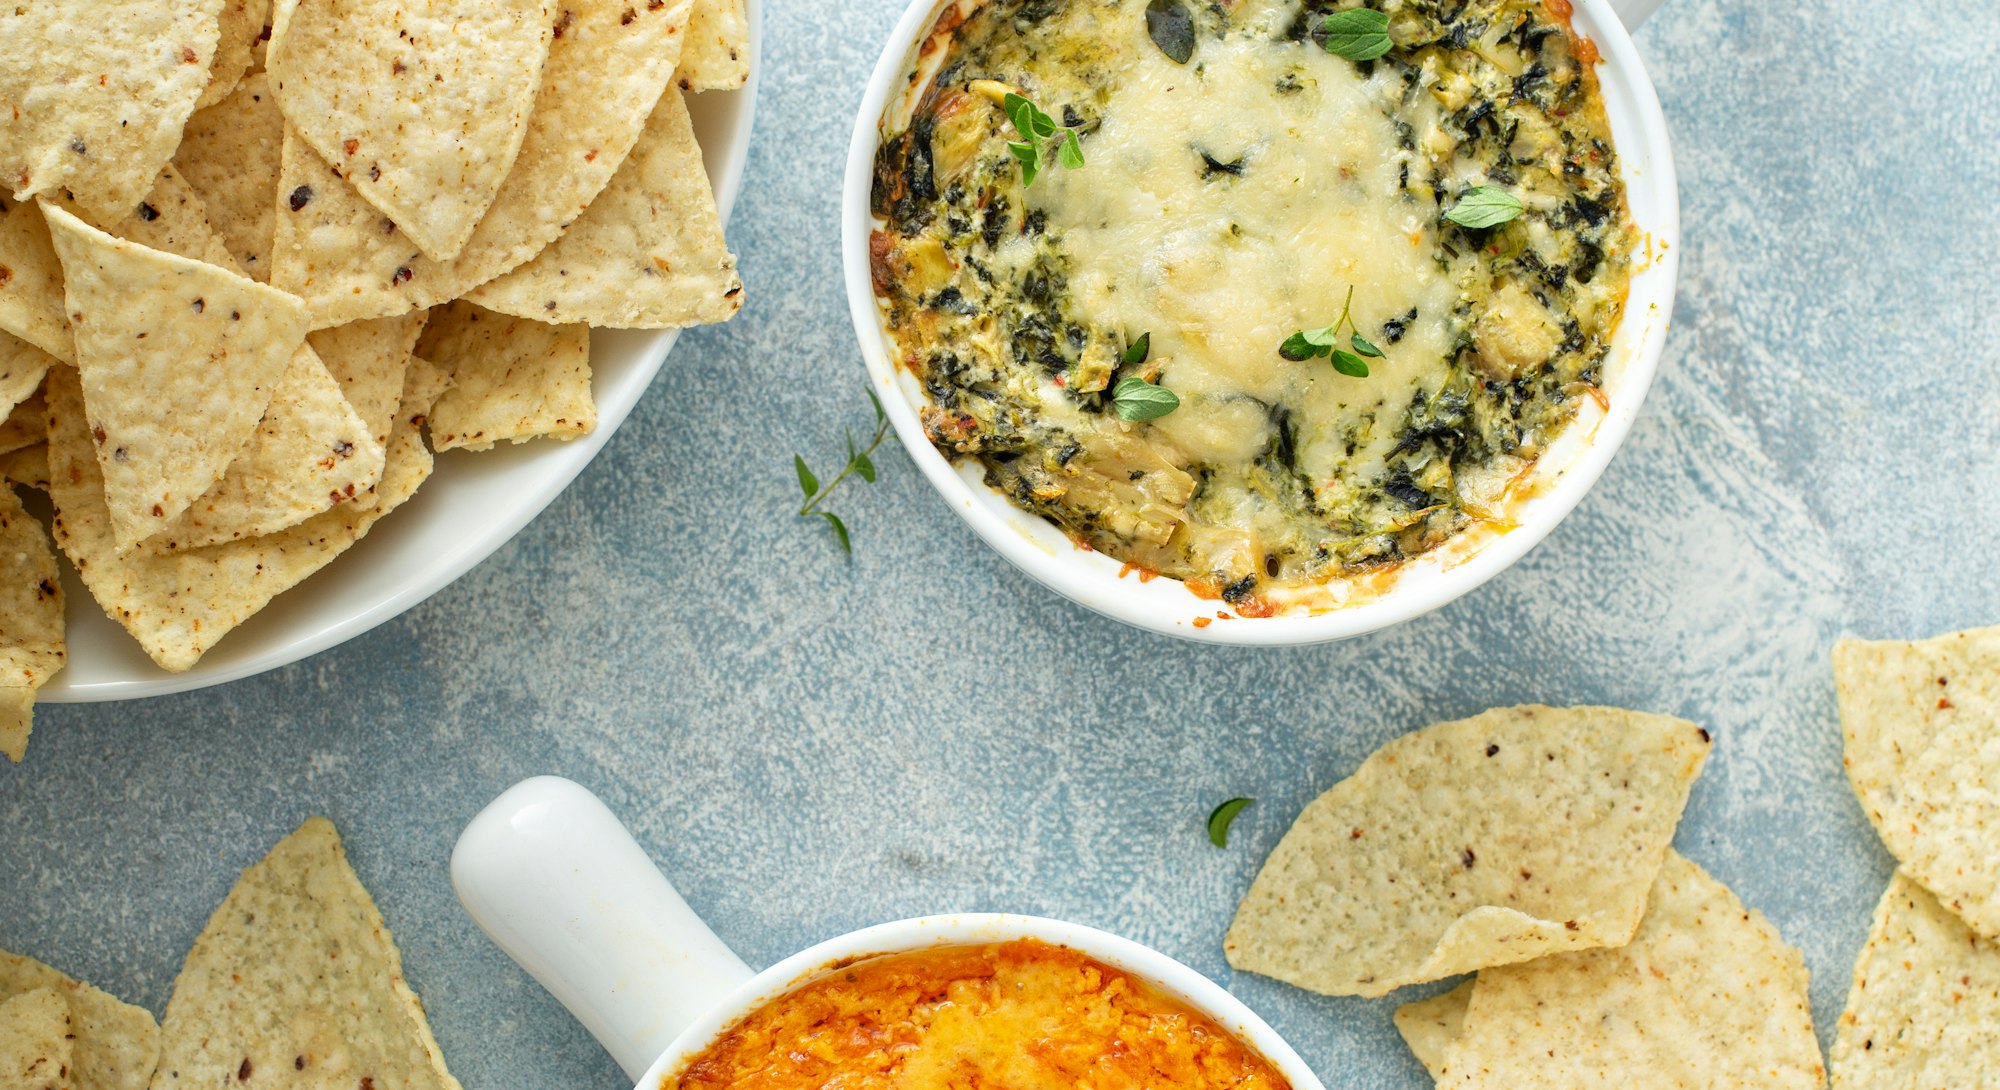 Artichoke spinach and buffalo chicken dips served with tortilla chips, appetizers